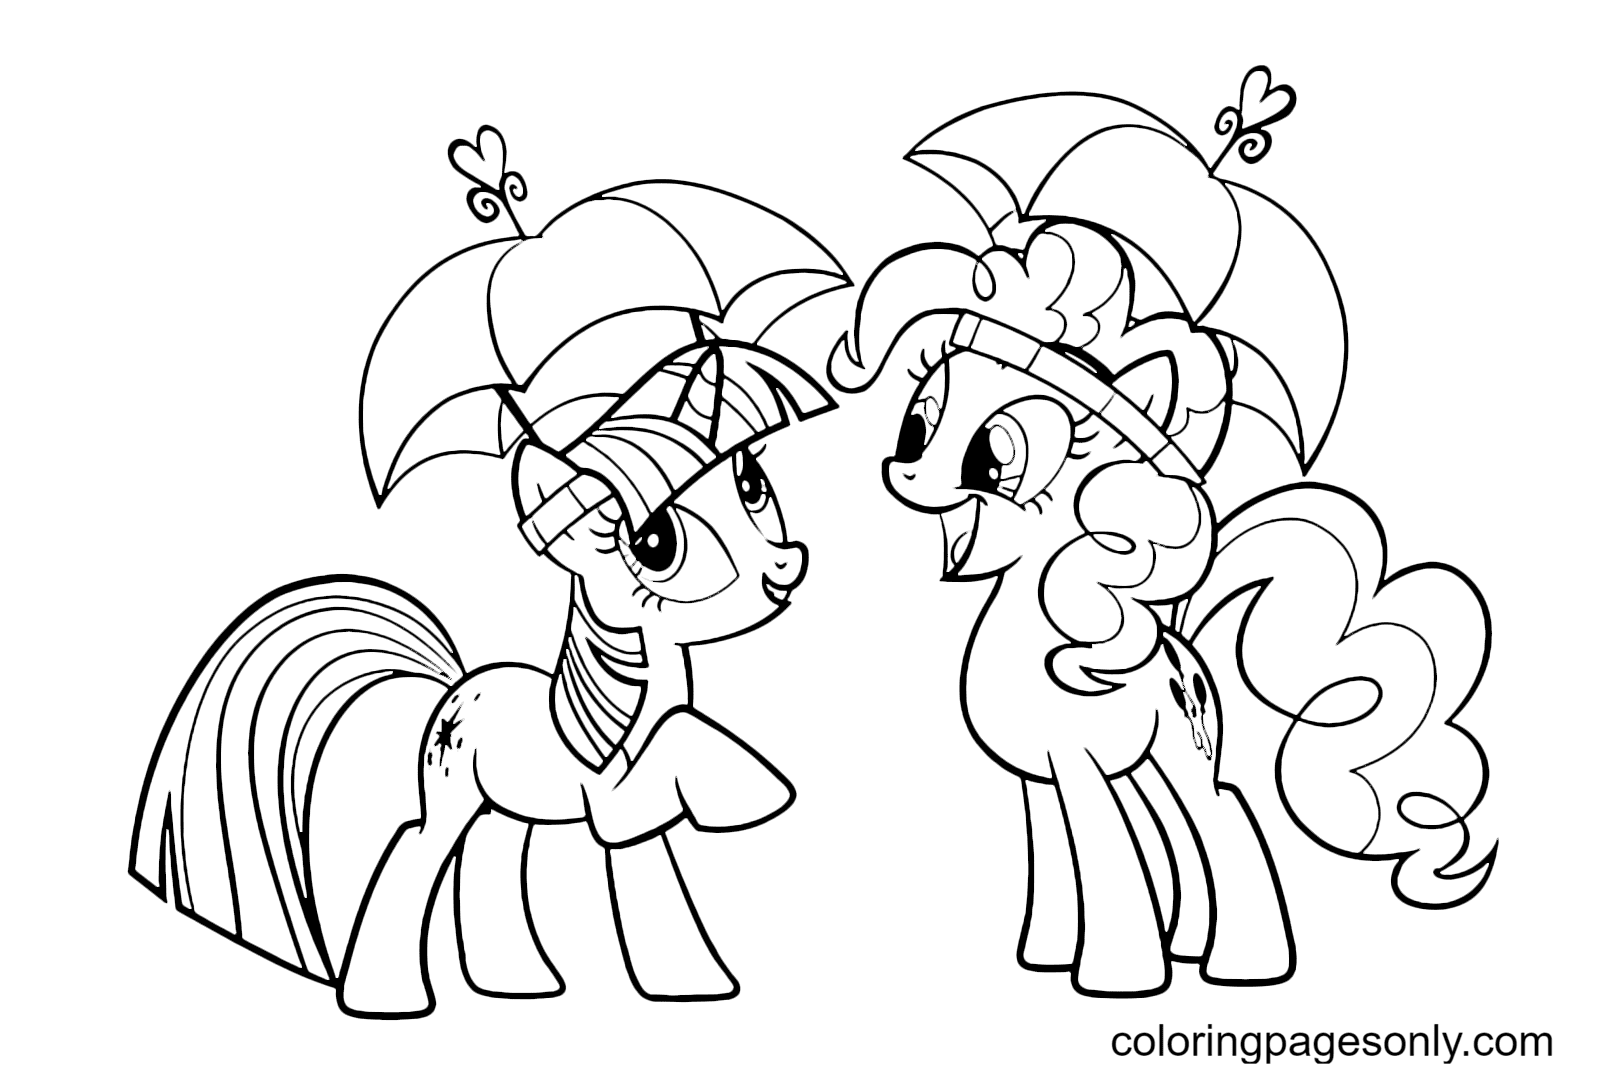 Twilight Sparkle and Pinkie Pie Coloring Page